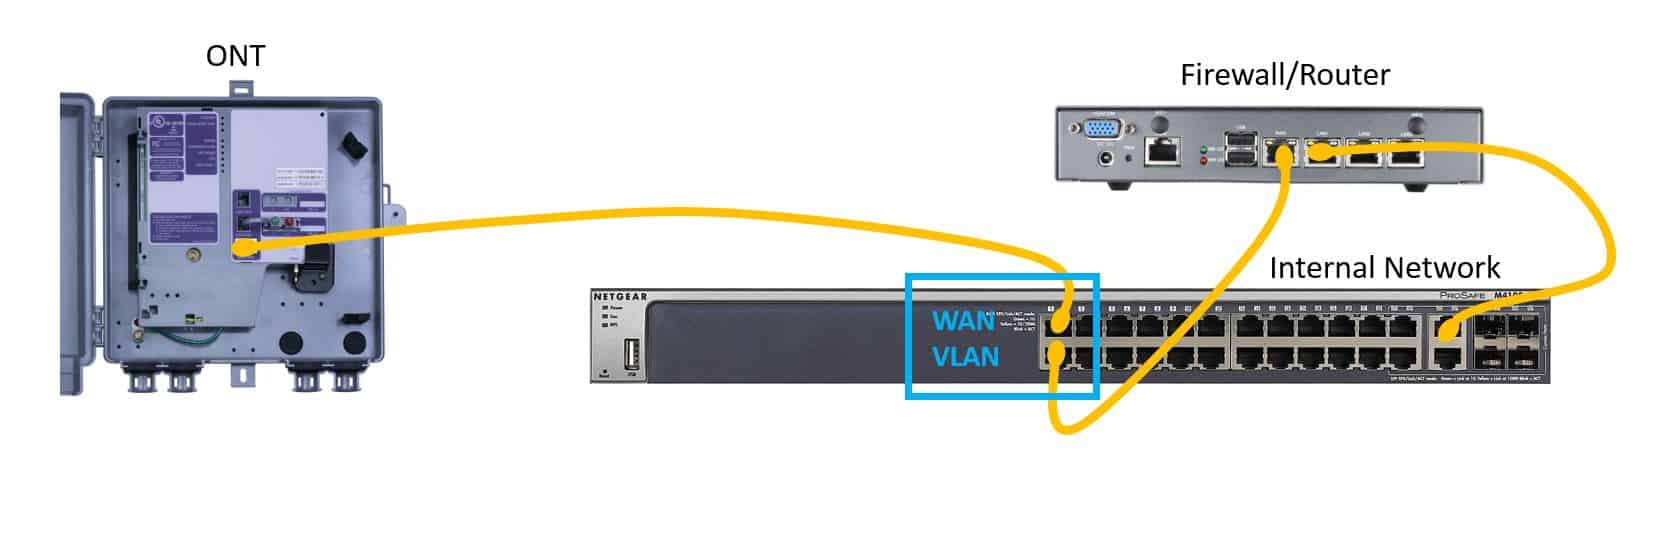 Figure 2: WAN VLAN between the ONT and the Router